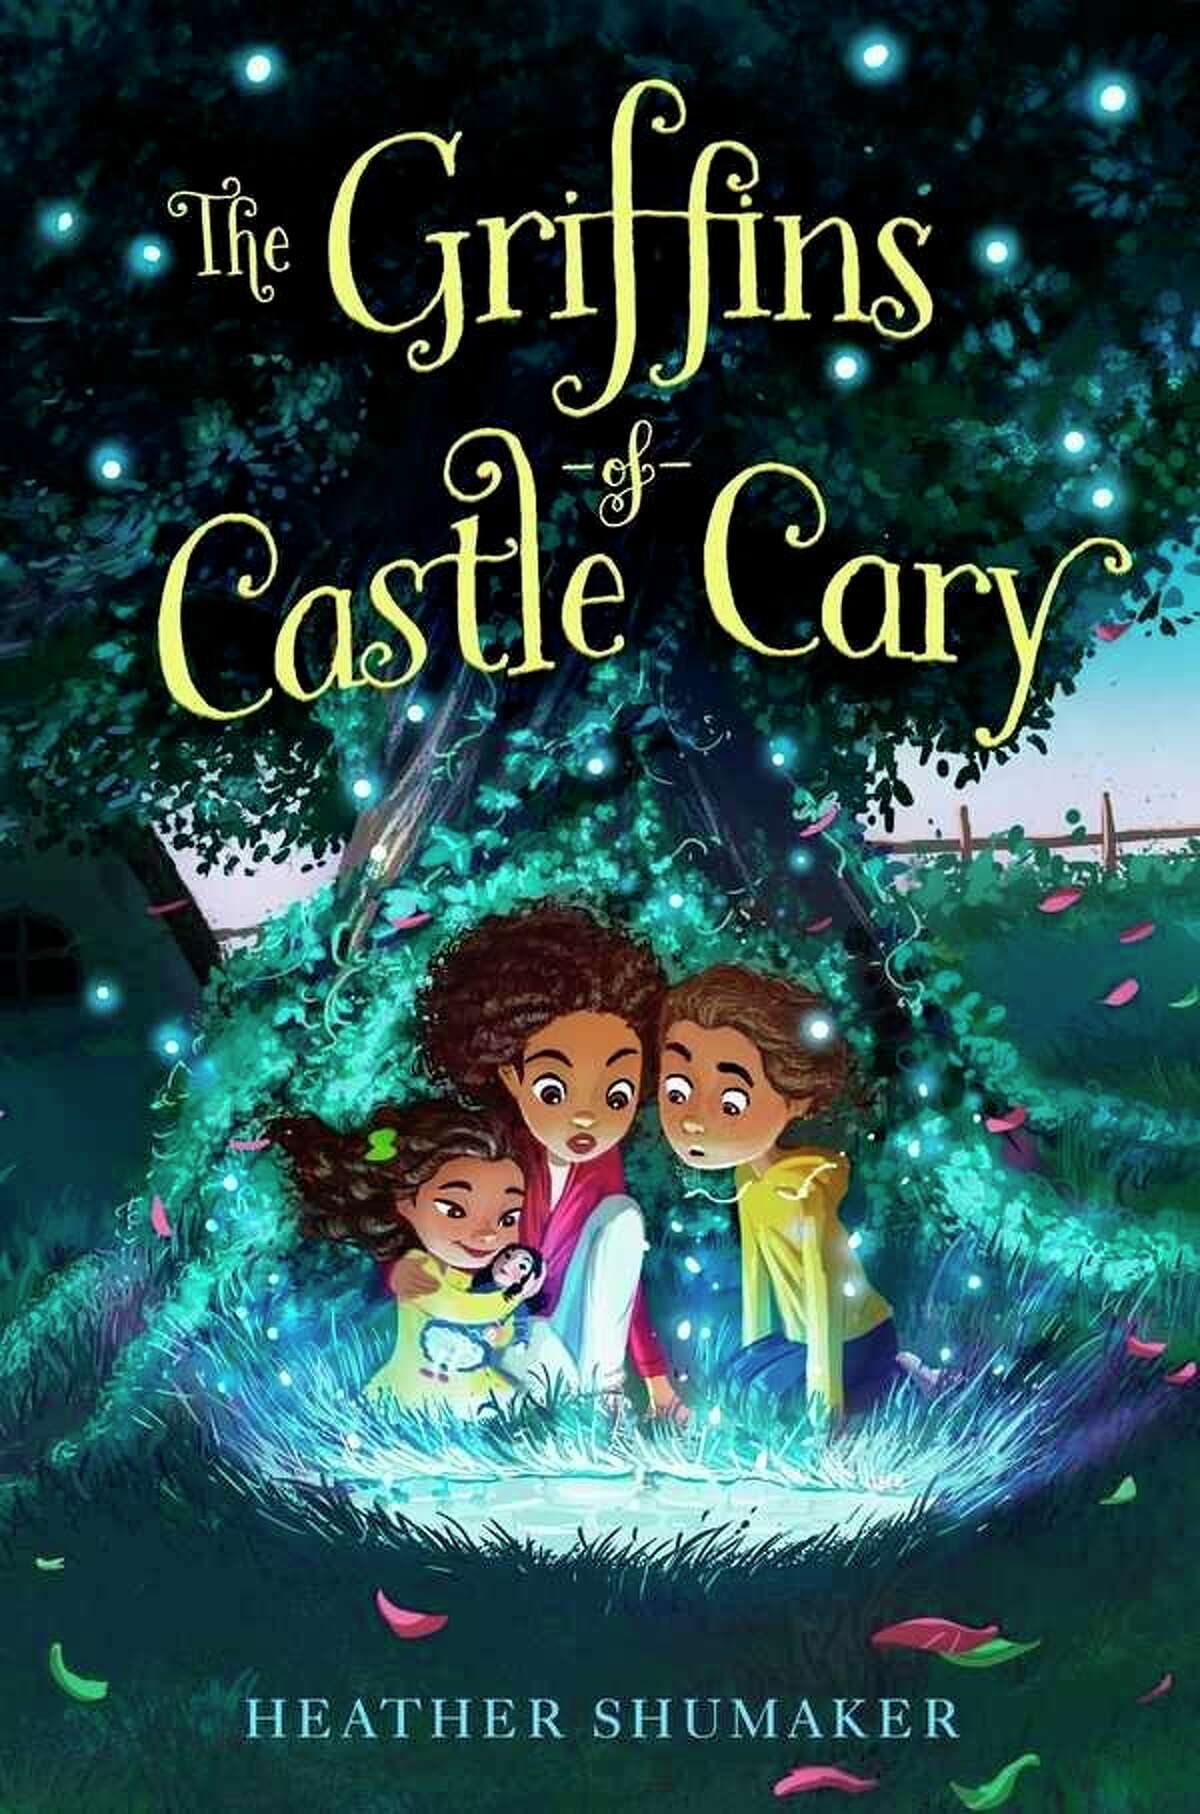 Author Heather Shumaker has written her first kids novel, "The Griffins of Castle Cary." (Courtesy Photo/Heather Shumaker)